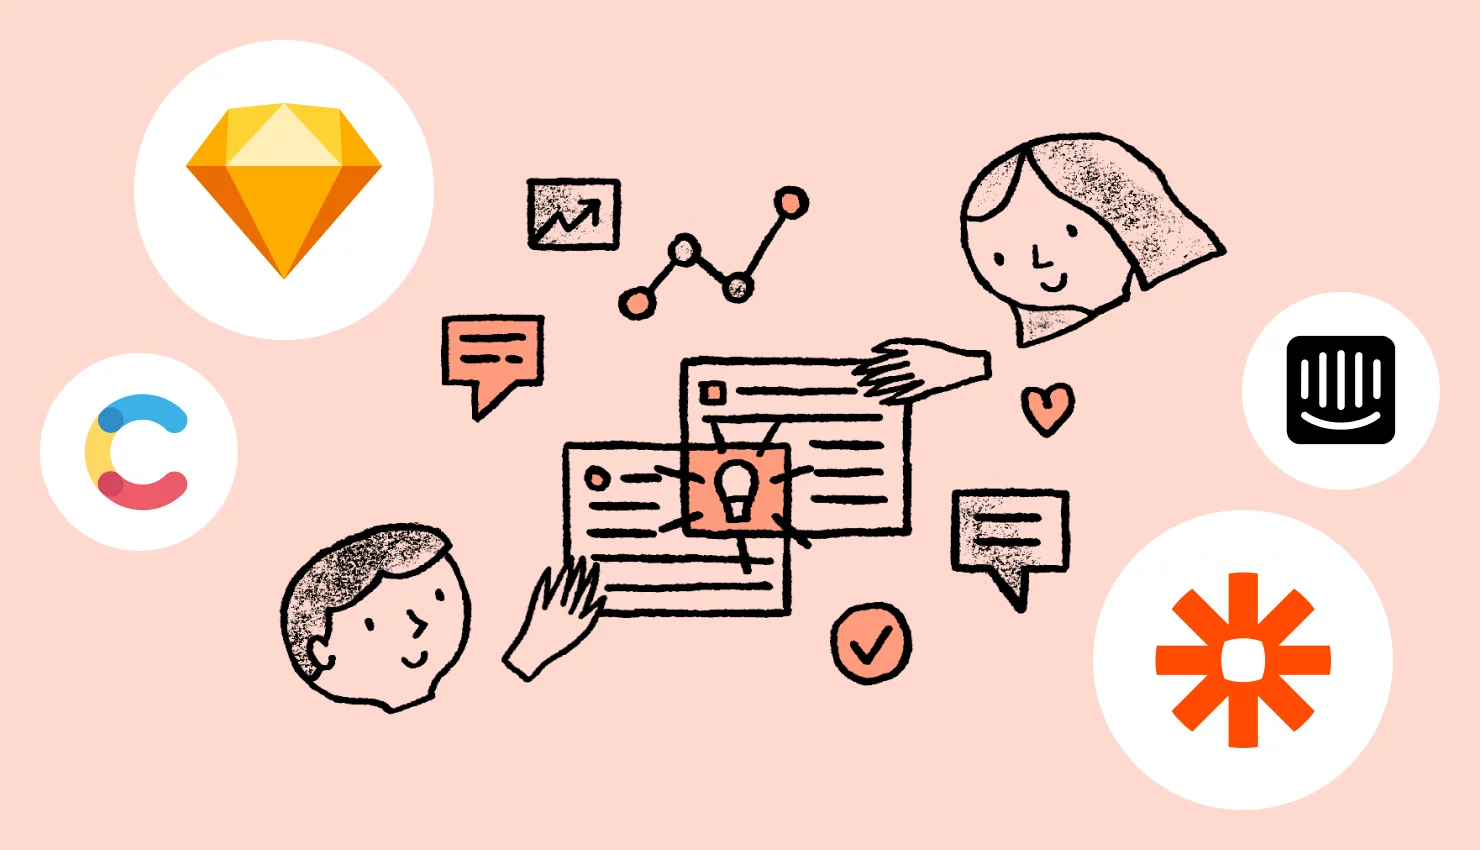 New in February: Sketch plugin, Zapier, and much more ⚡